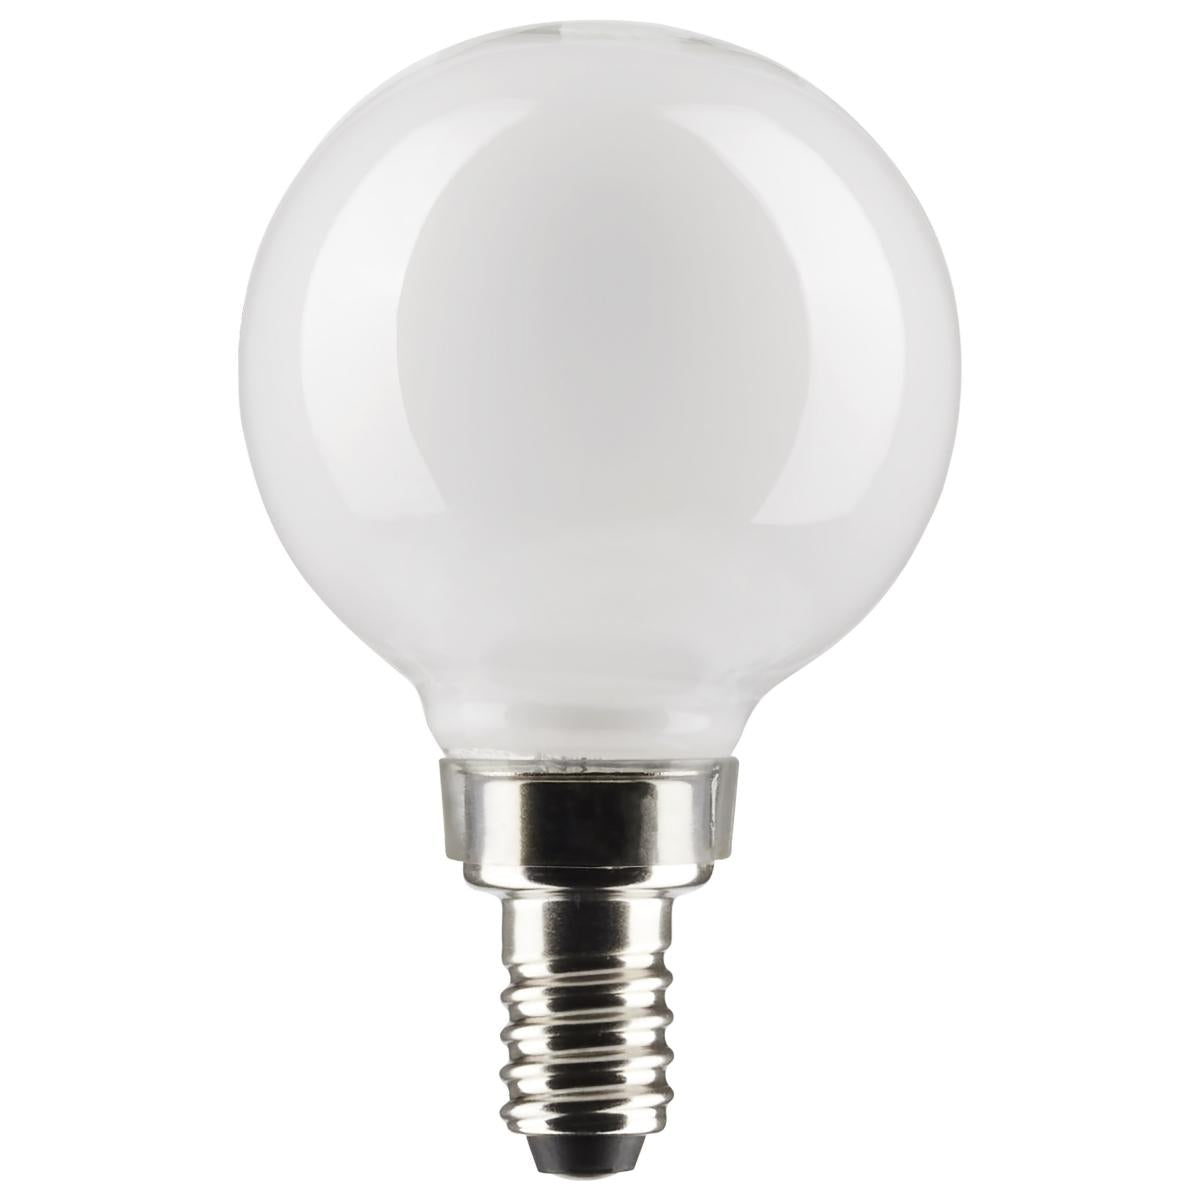 Replacement for Satco S3772 60W G16 1/2 60 watt G16 1/2 Satin White Incandescent Candelabra base 120 volts - NOW LED S21814